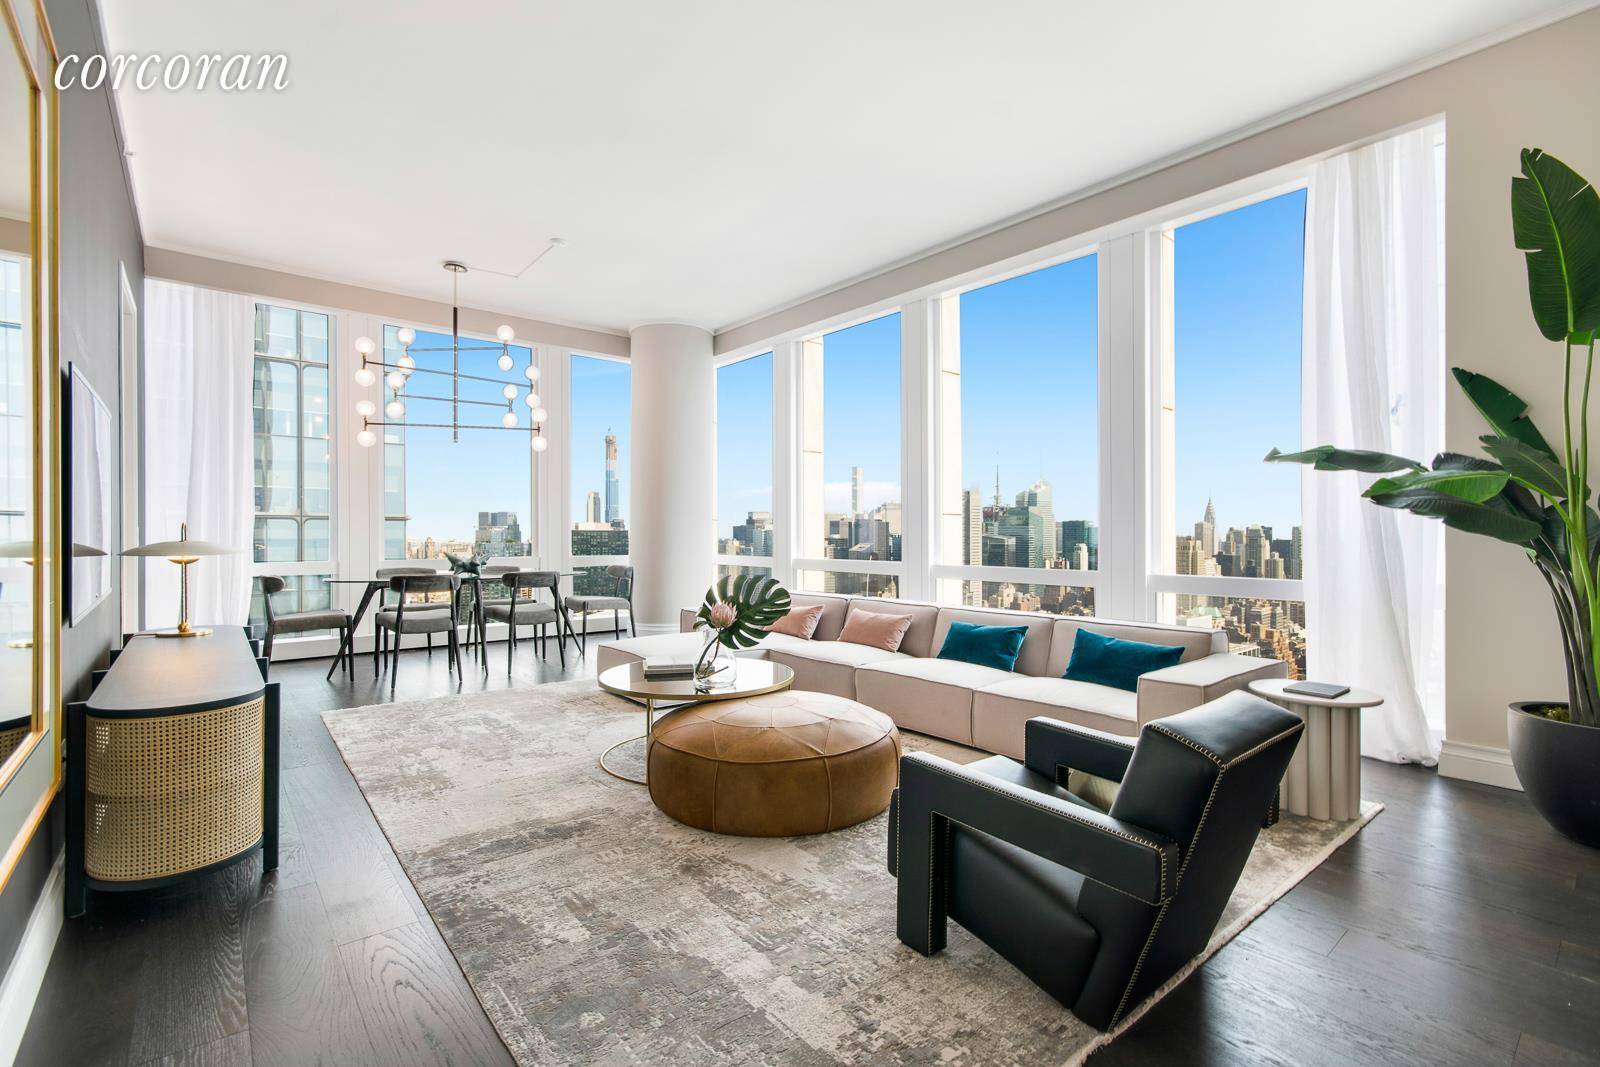 LIVE WHERE IT ALL COMES TOGETHER 35 Hudson Yards, the tallest residential building at Hudson Yards, was designed by David Childs SOM featuring a beautiful facade of Bavarian limestone, while ...